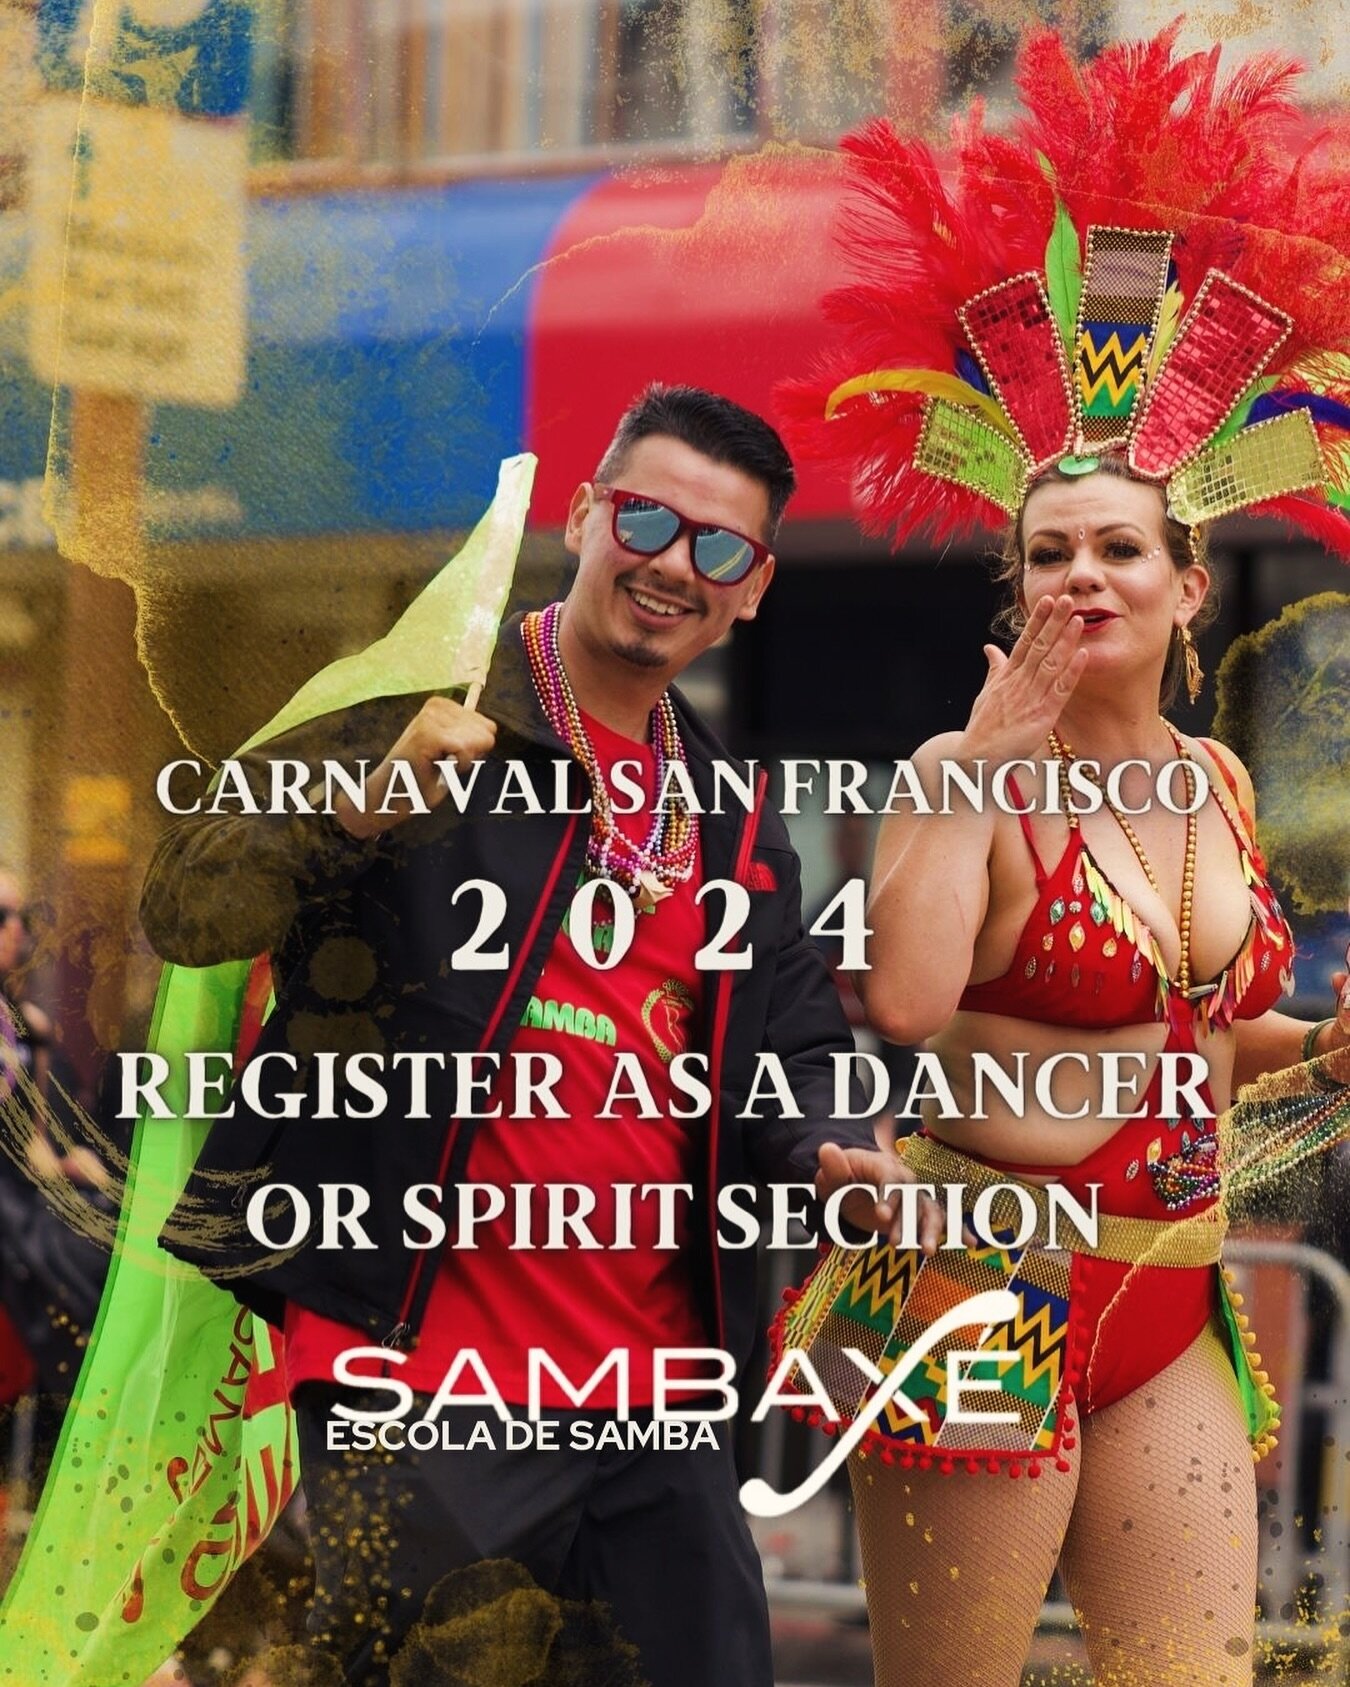 Join us as a DANCER or join our SPIRIT SECTION ✨
.

Join us this Memorial Day Weekend: Sunday, May 26th 2024

We look forward to seeing returning dancers, spirit section folks, and especially new faces! We welcome all levels, including true beginners